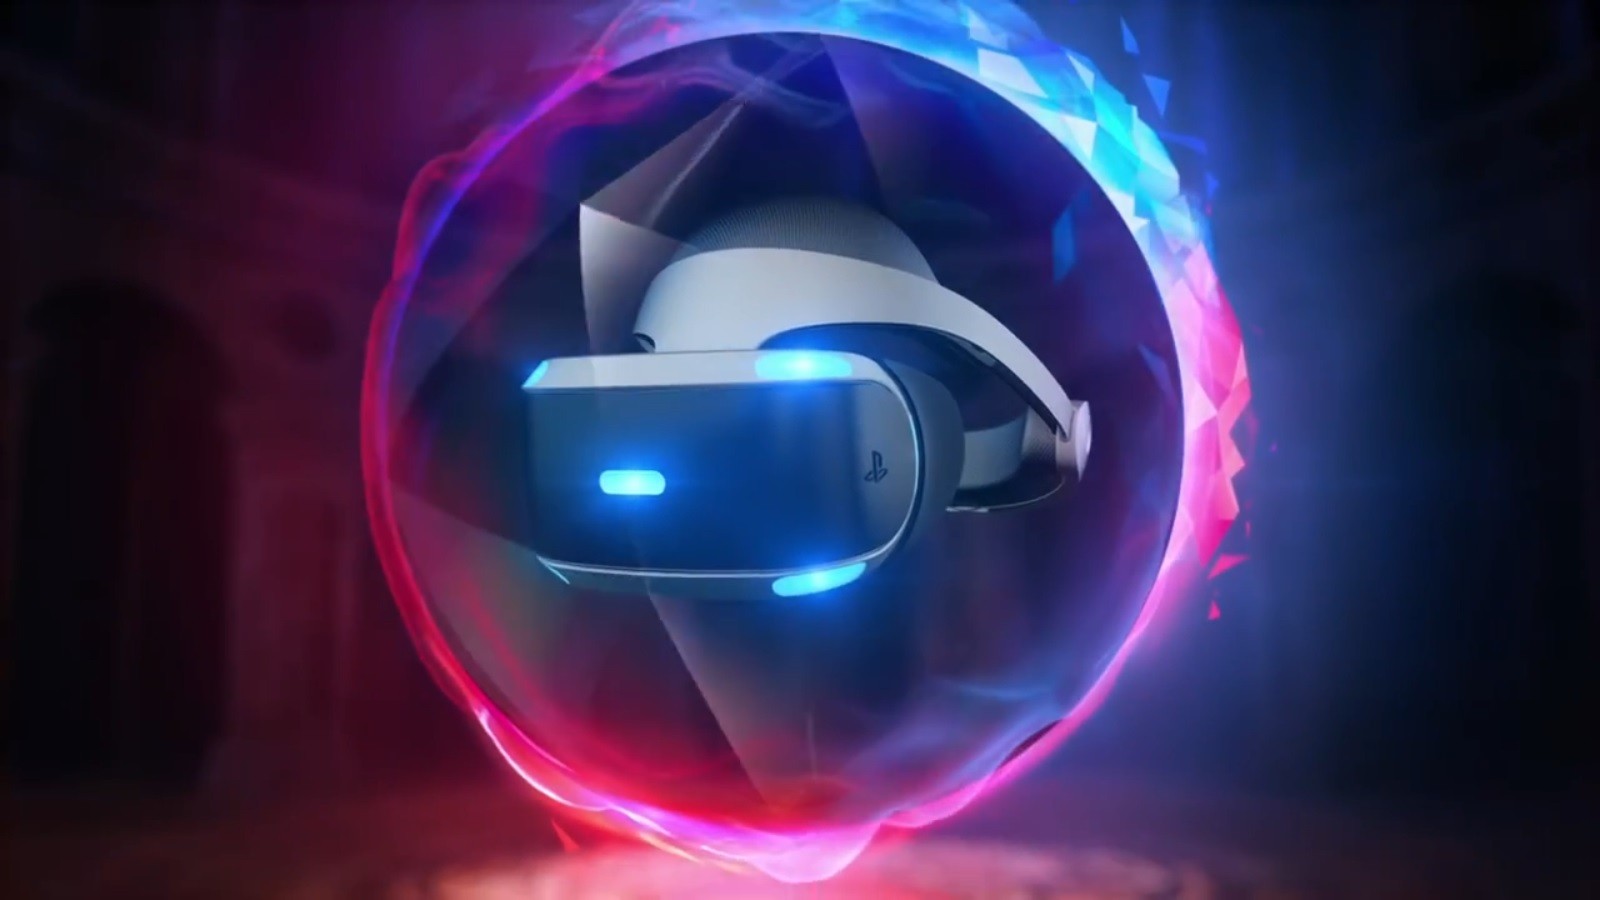 The 25 best games on the PlayStation VR